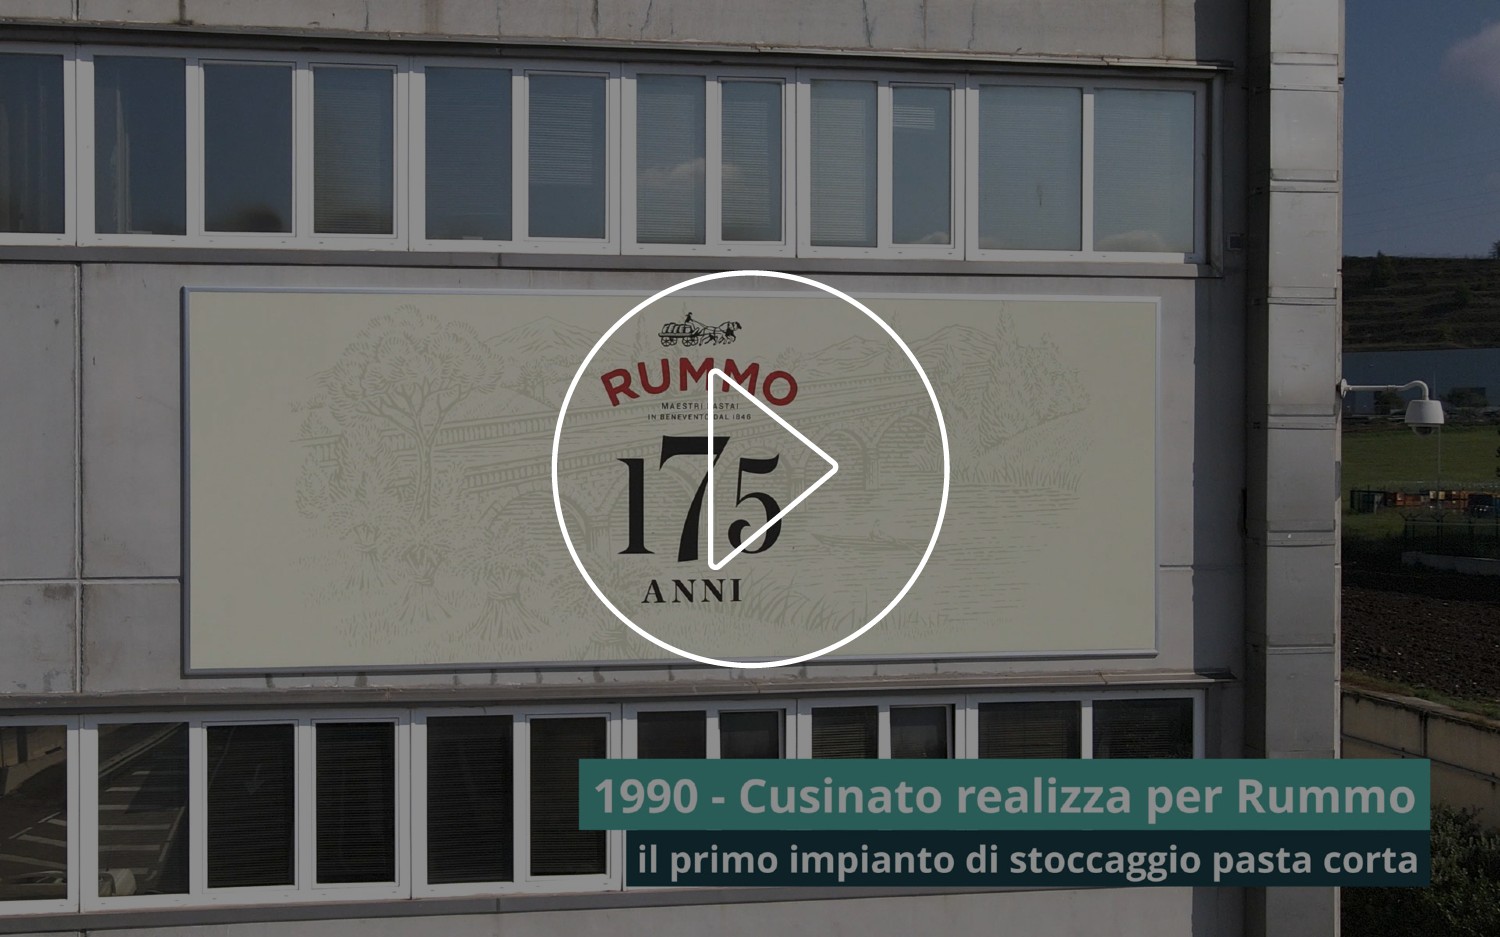 Business between the Rummo pasta factory and Cusinato has been strengthened